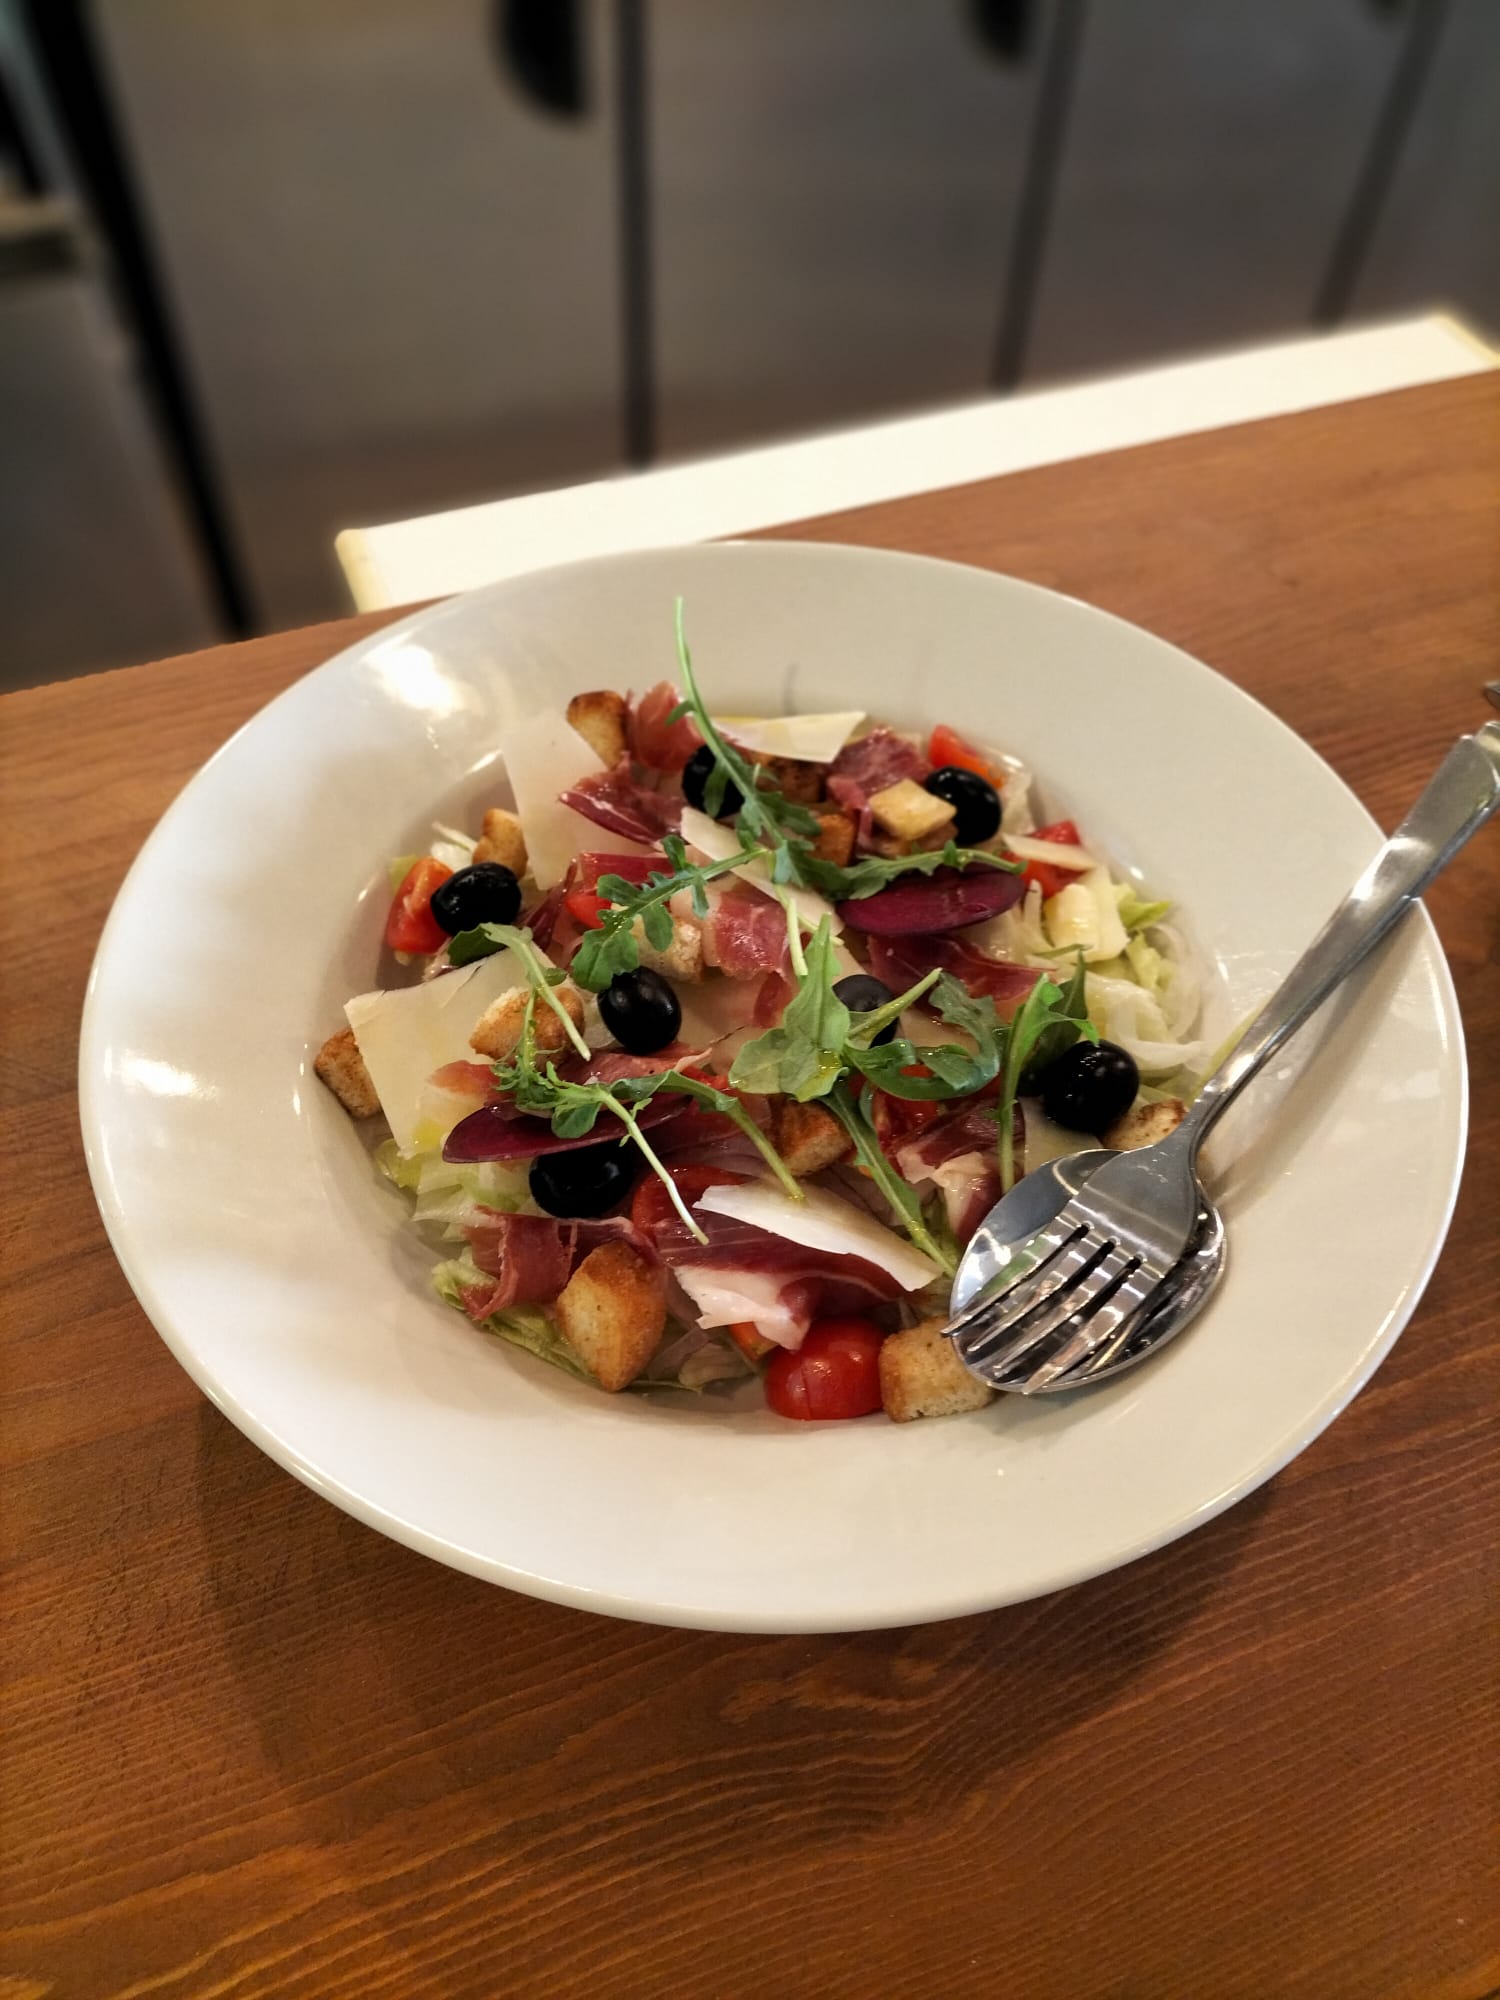 Iberian Ham Salad with Lettuce, Cherry Tomatoes, Cheeses, olives and croutons.